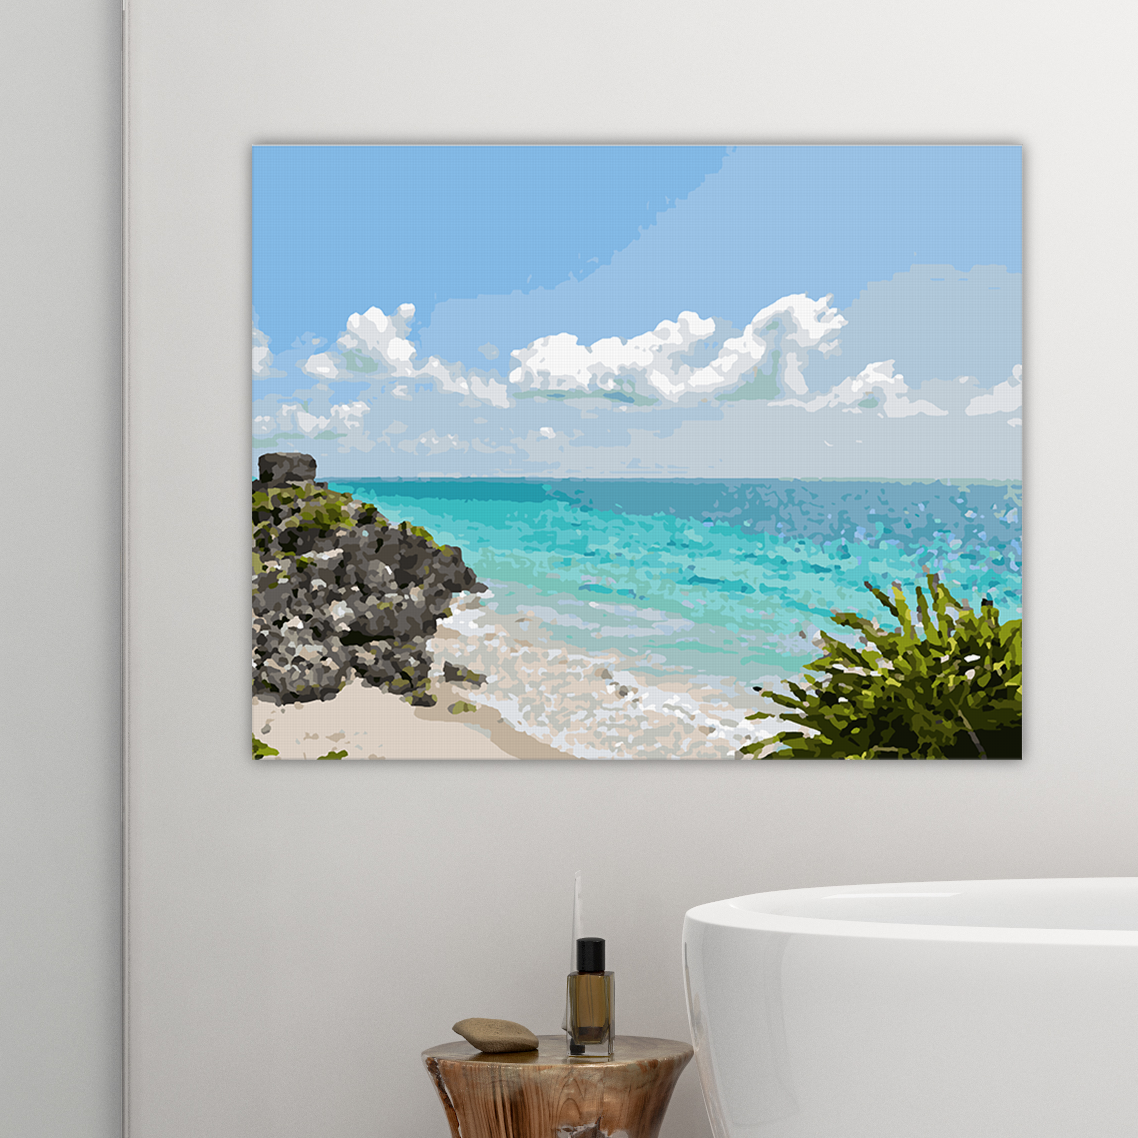 Beach at Tulum - Paint By Numbers Kit